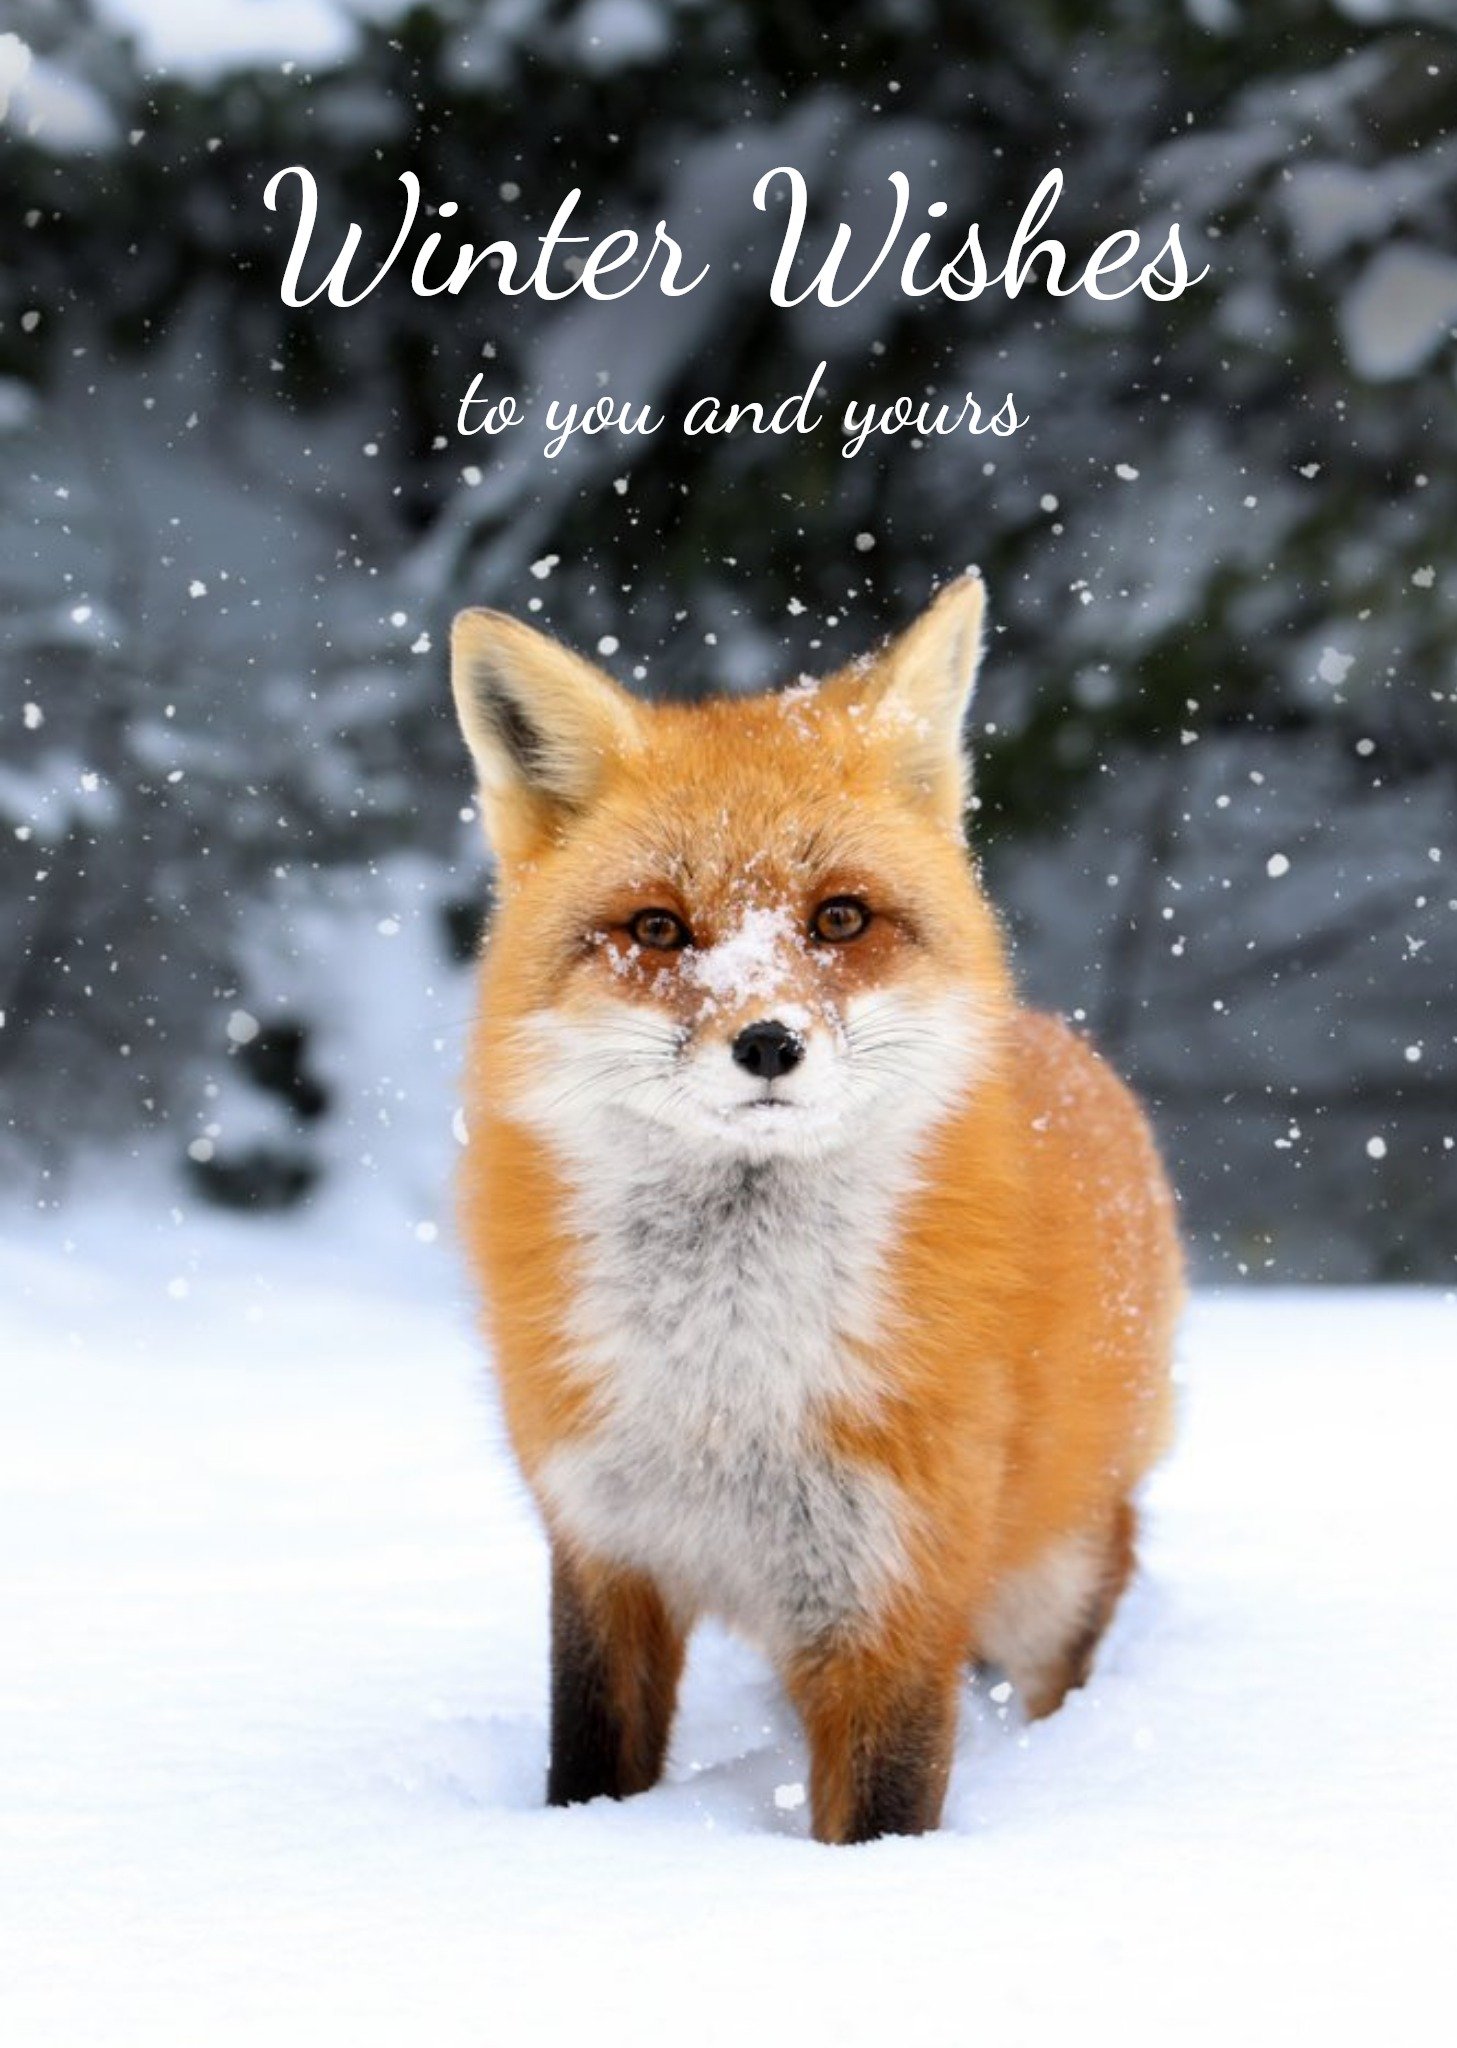 Moonpig Christmas Card - Winter Wishes - Snow - Fox - To You And Yours Ecard